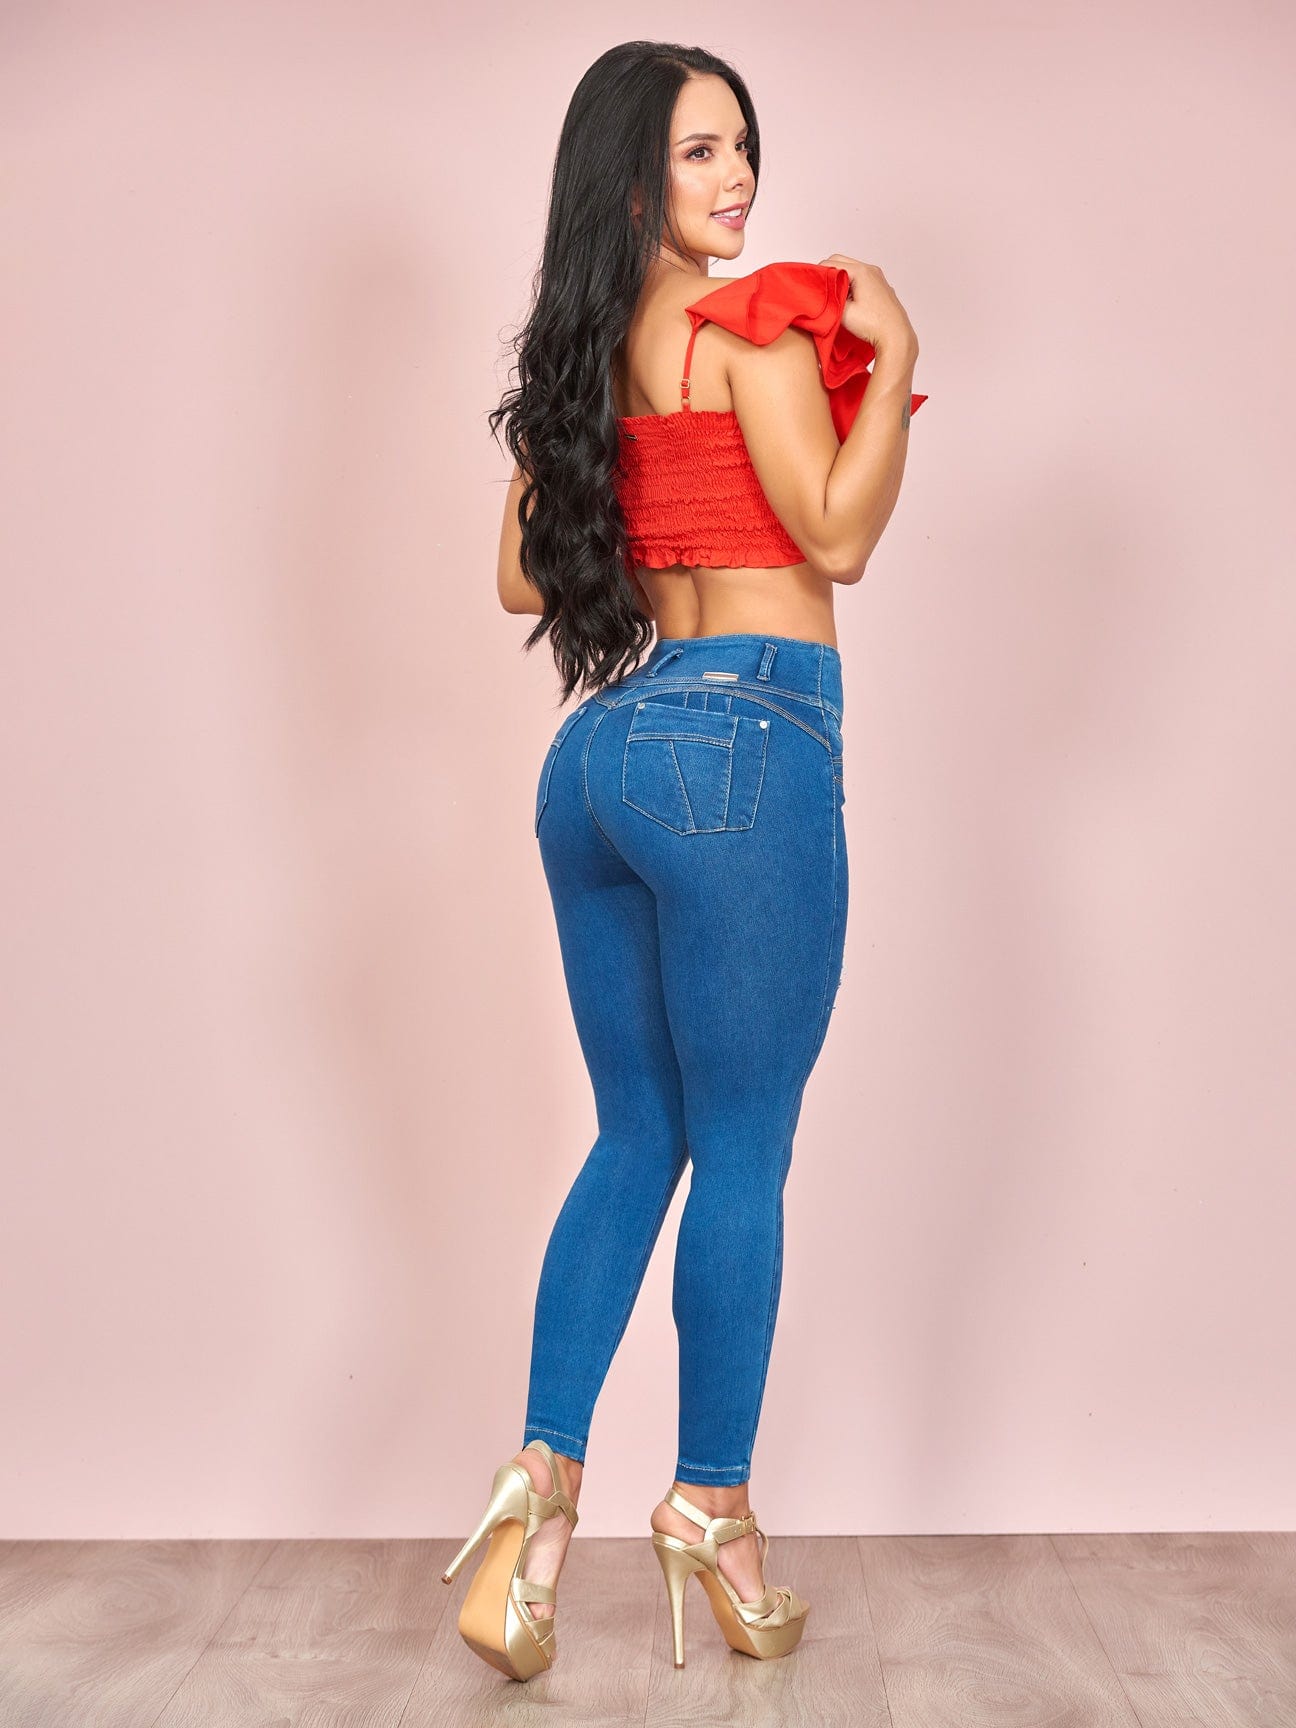 Full back view of Jersey Girl Booty Jeans.